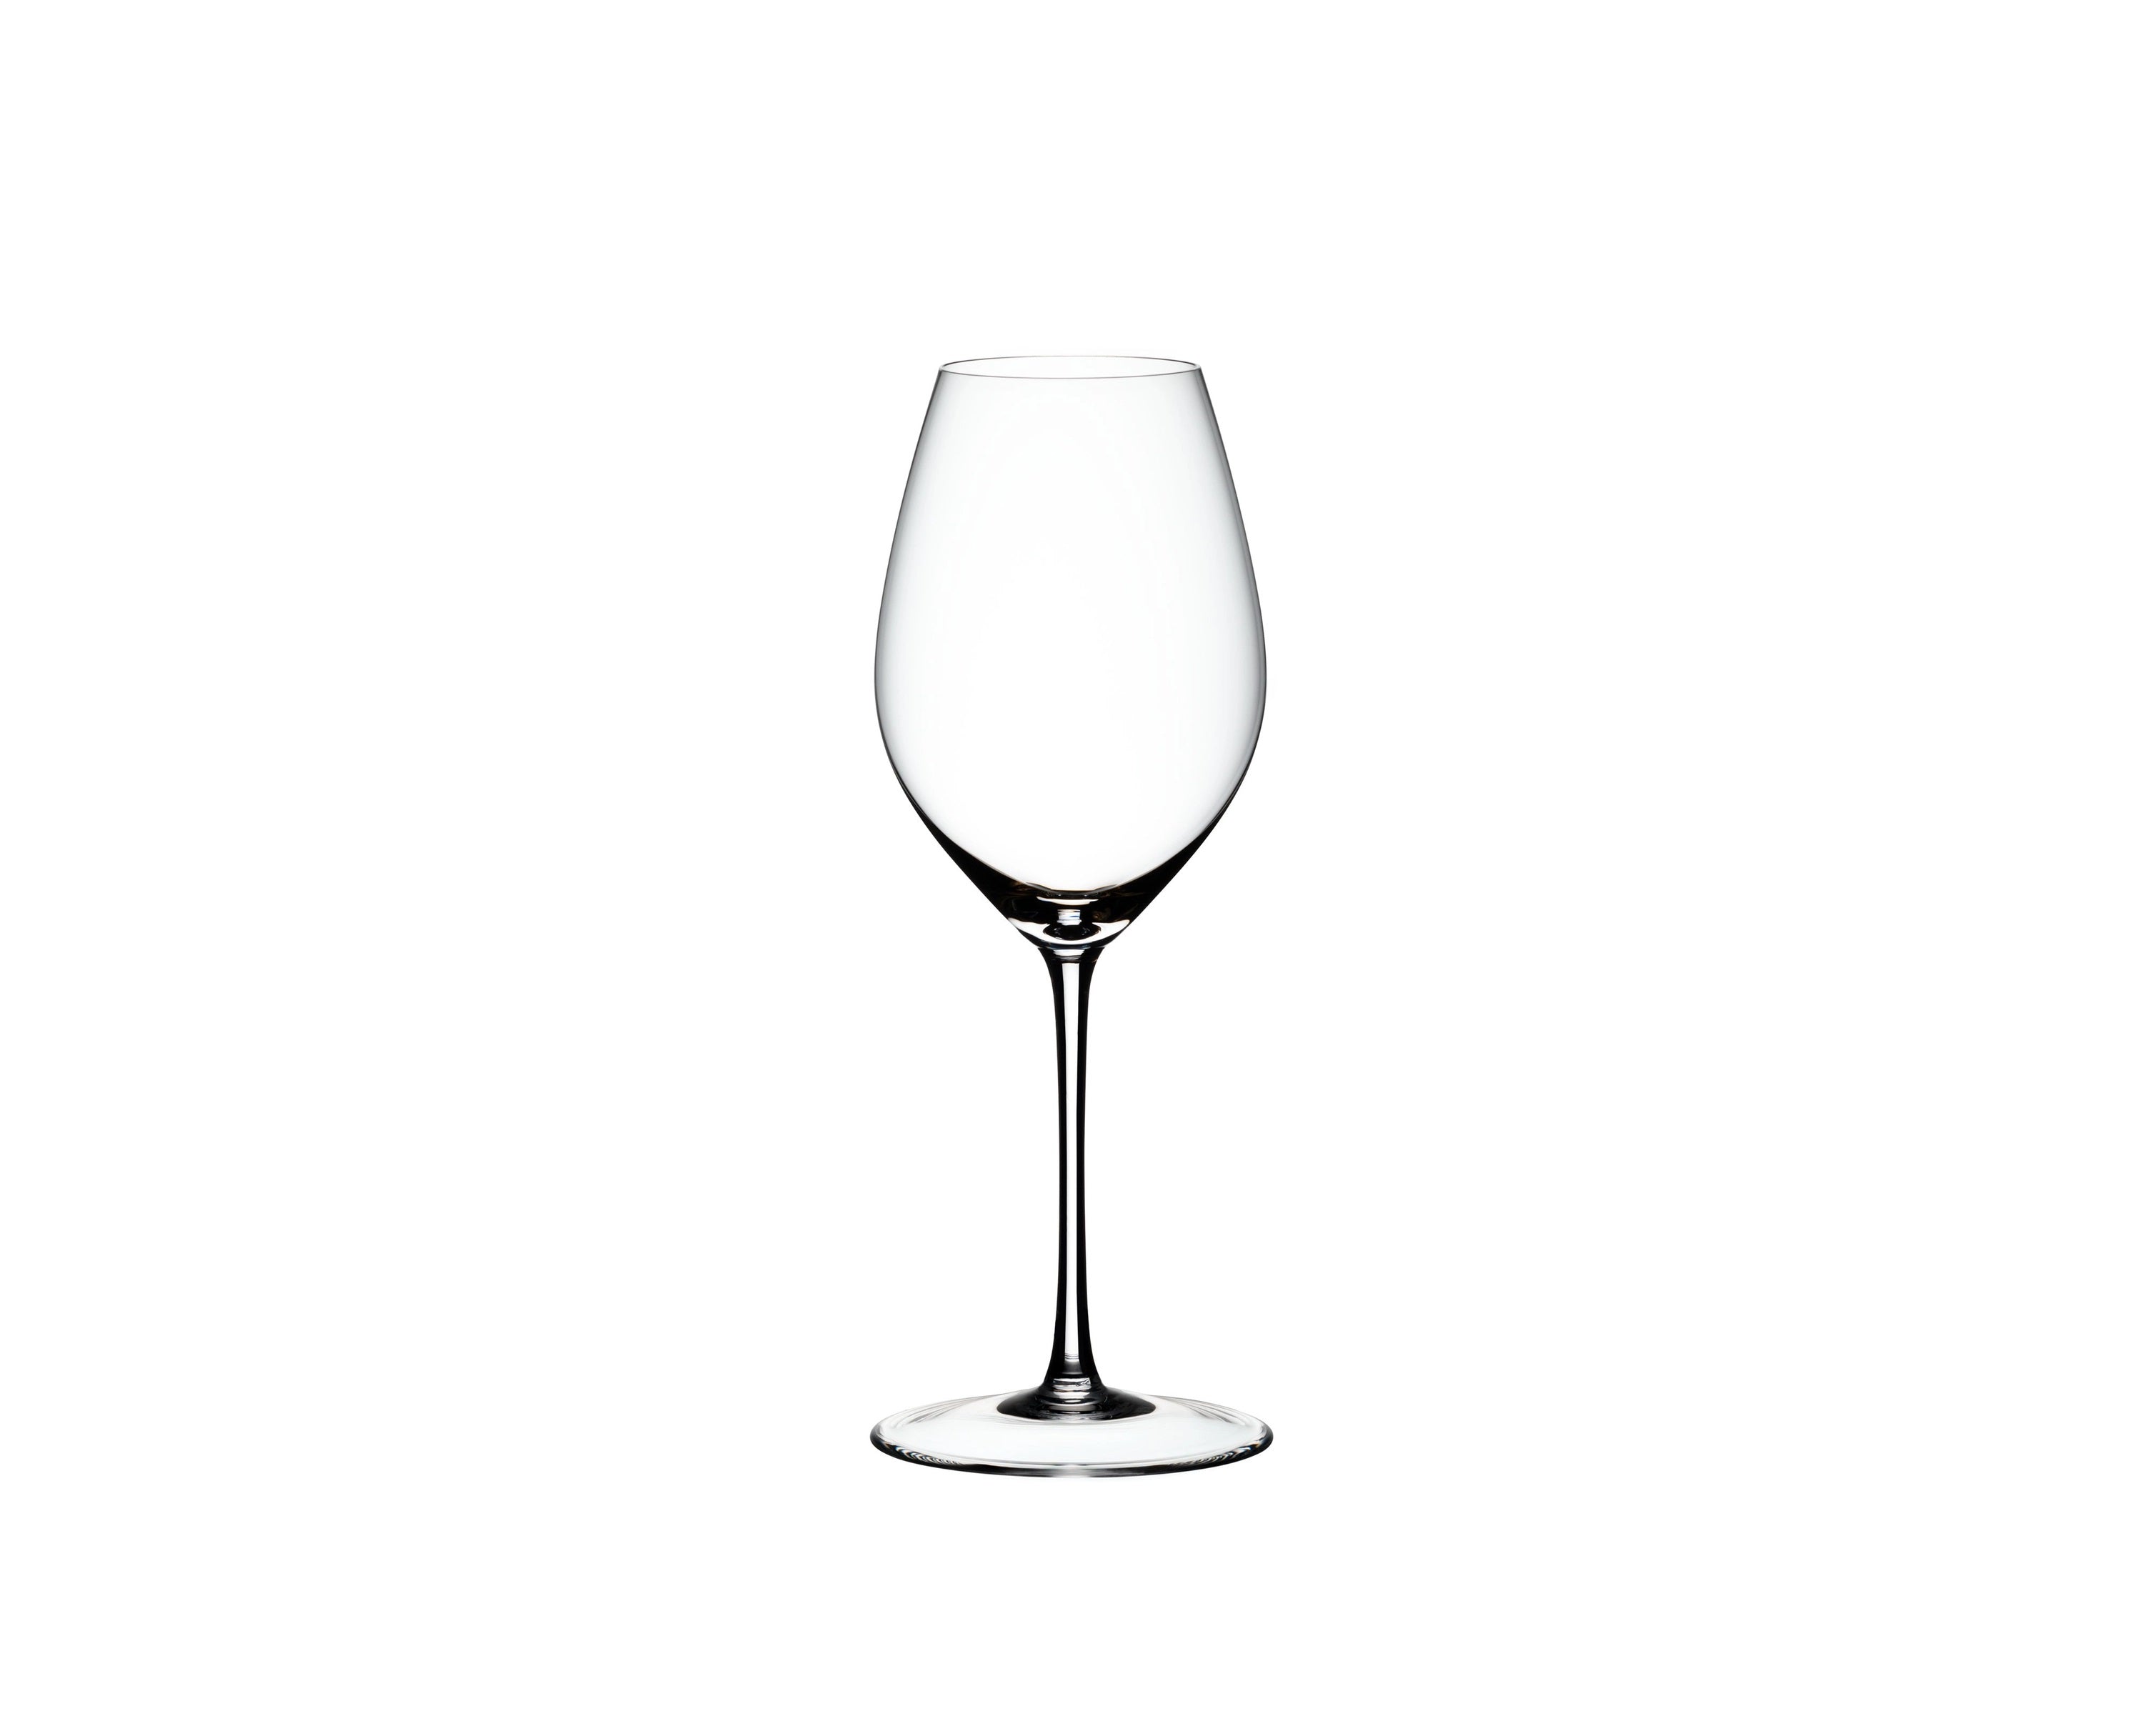 Riedel Sommeliers Goblet Champagne Wine Glass, Set of 4 pieces